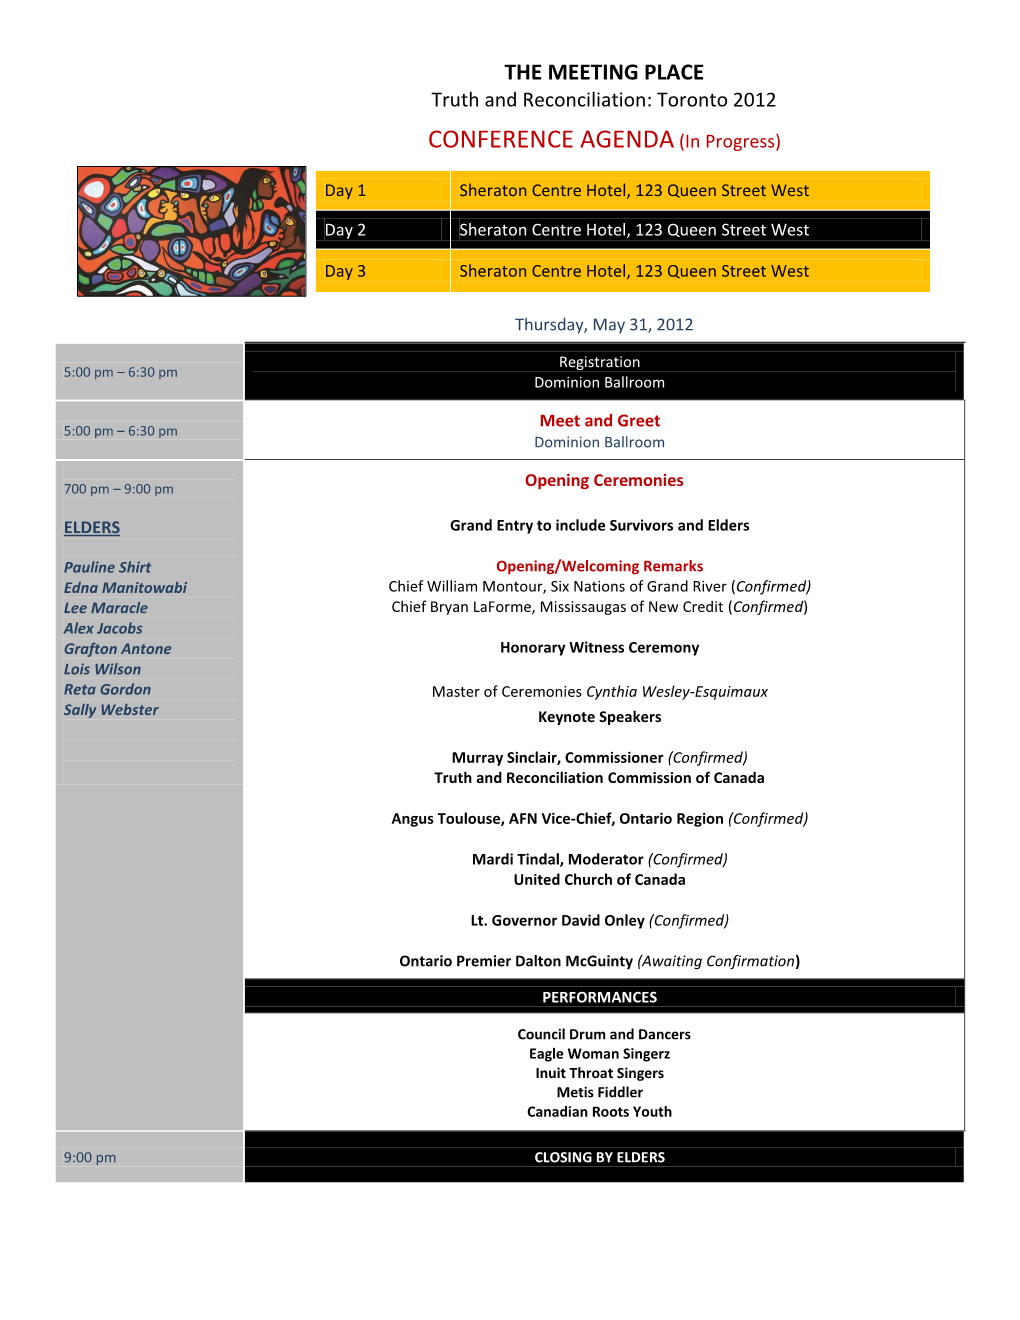 THE MEETING PLACE Truth and Reconciliation: Toronto 2012 CONFERENCE AGENDA (In Progress)